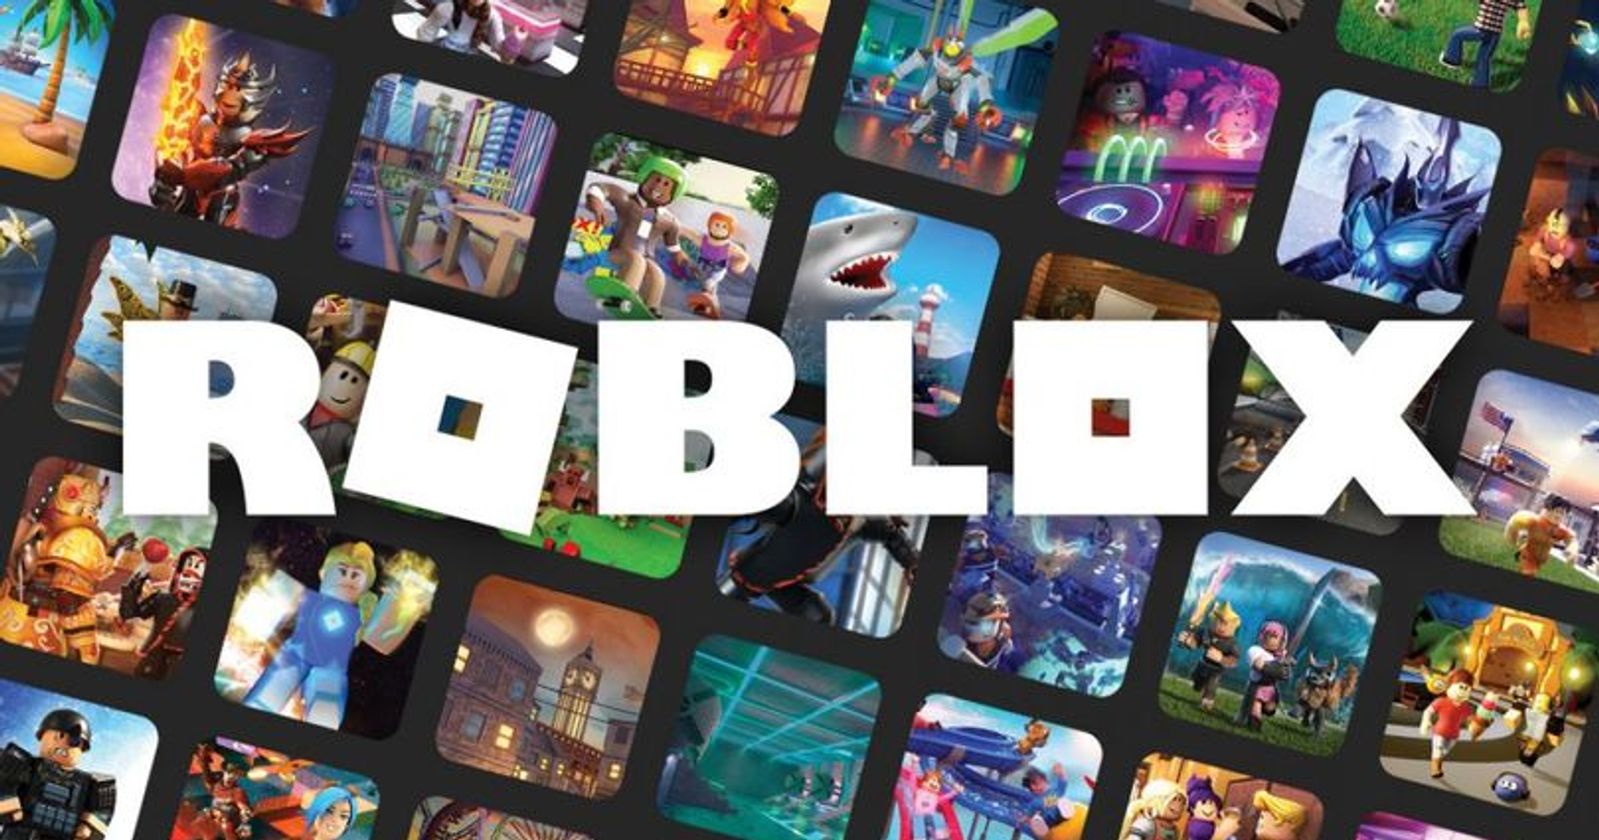 When Is the 'Roblox' Voice Chat Release Date What Do Fans Think of It?